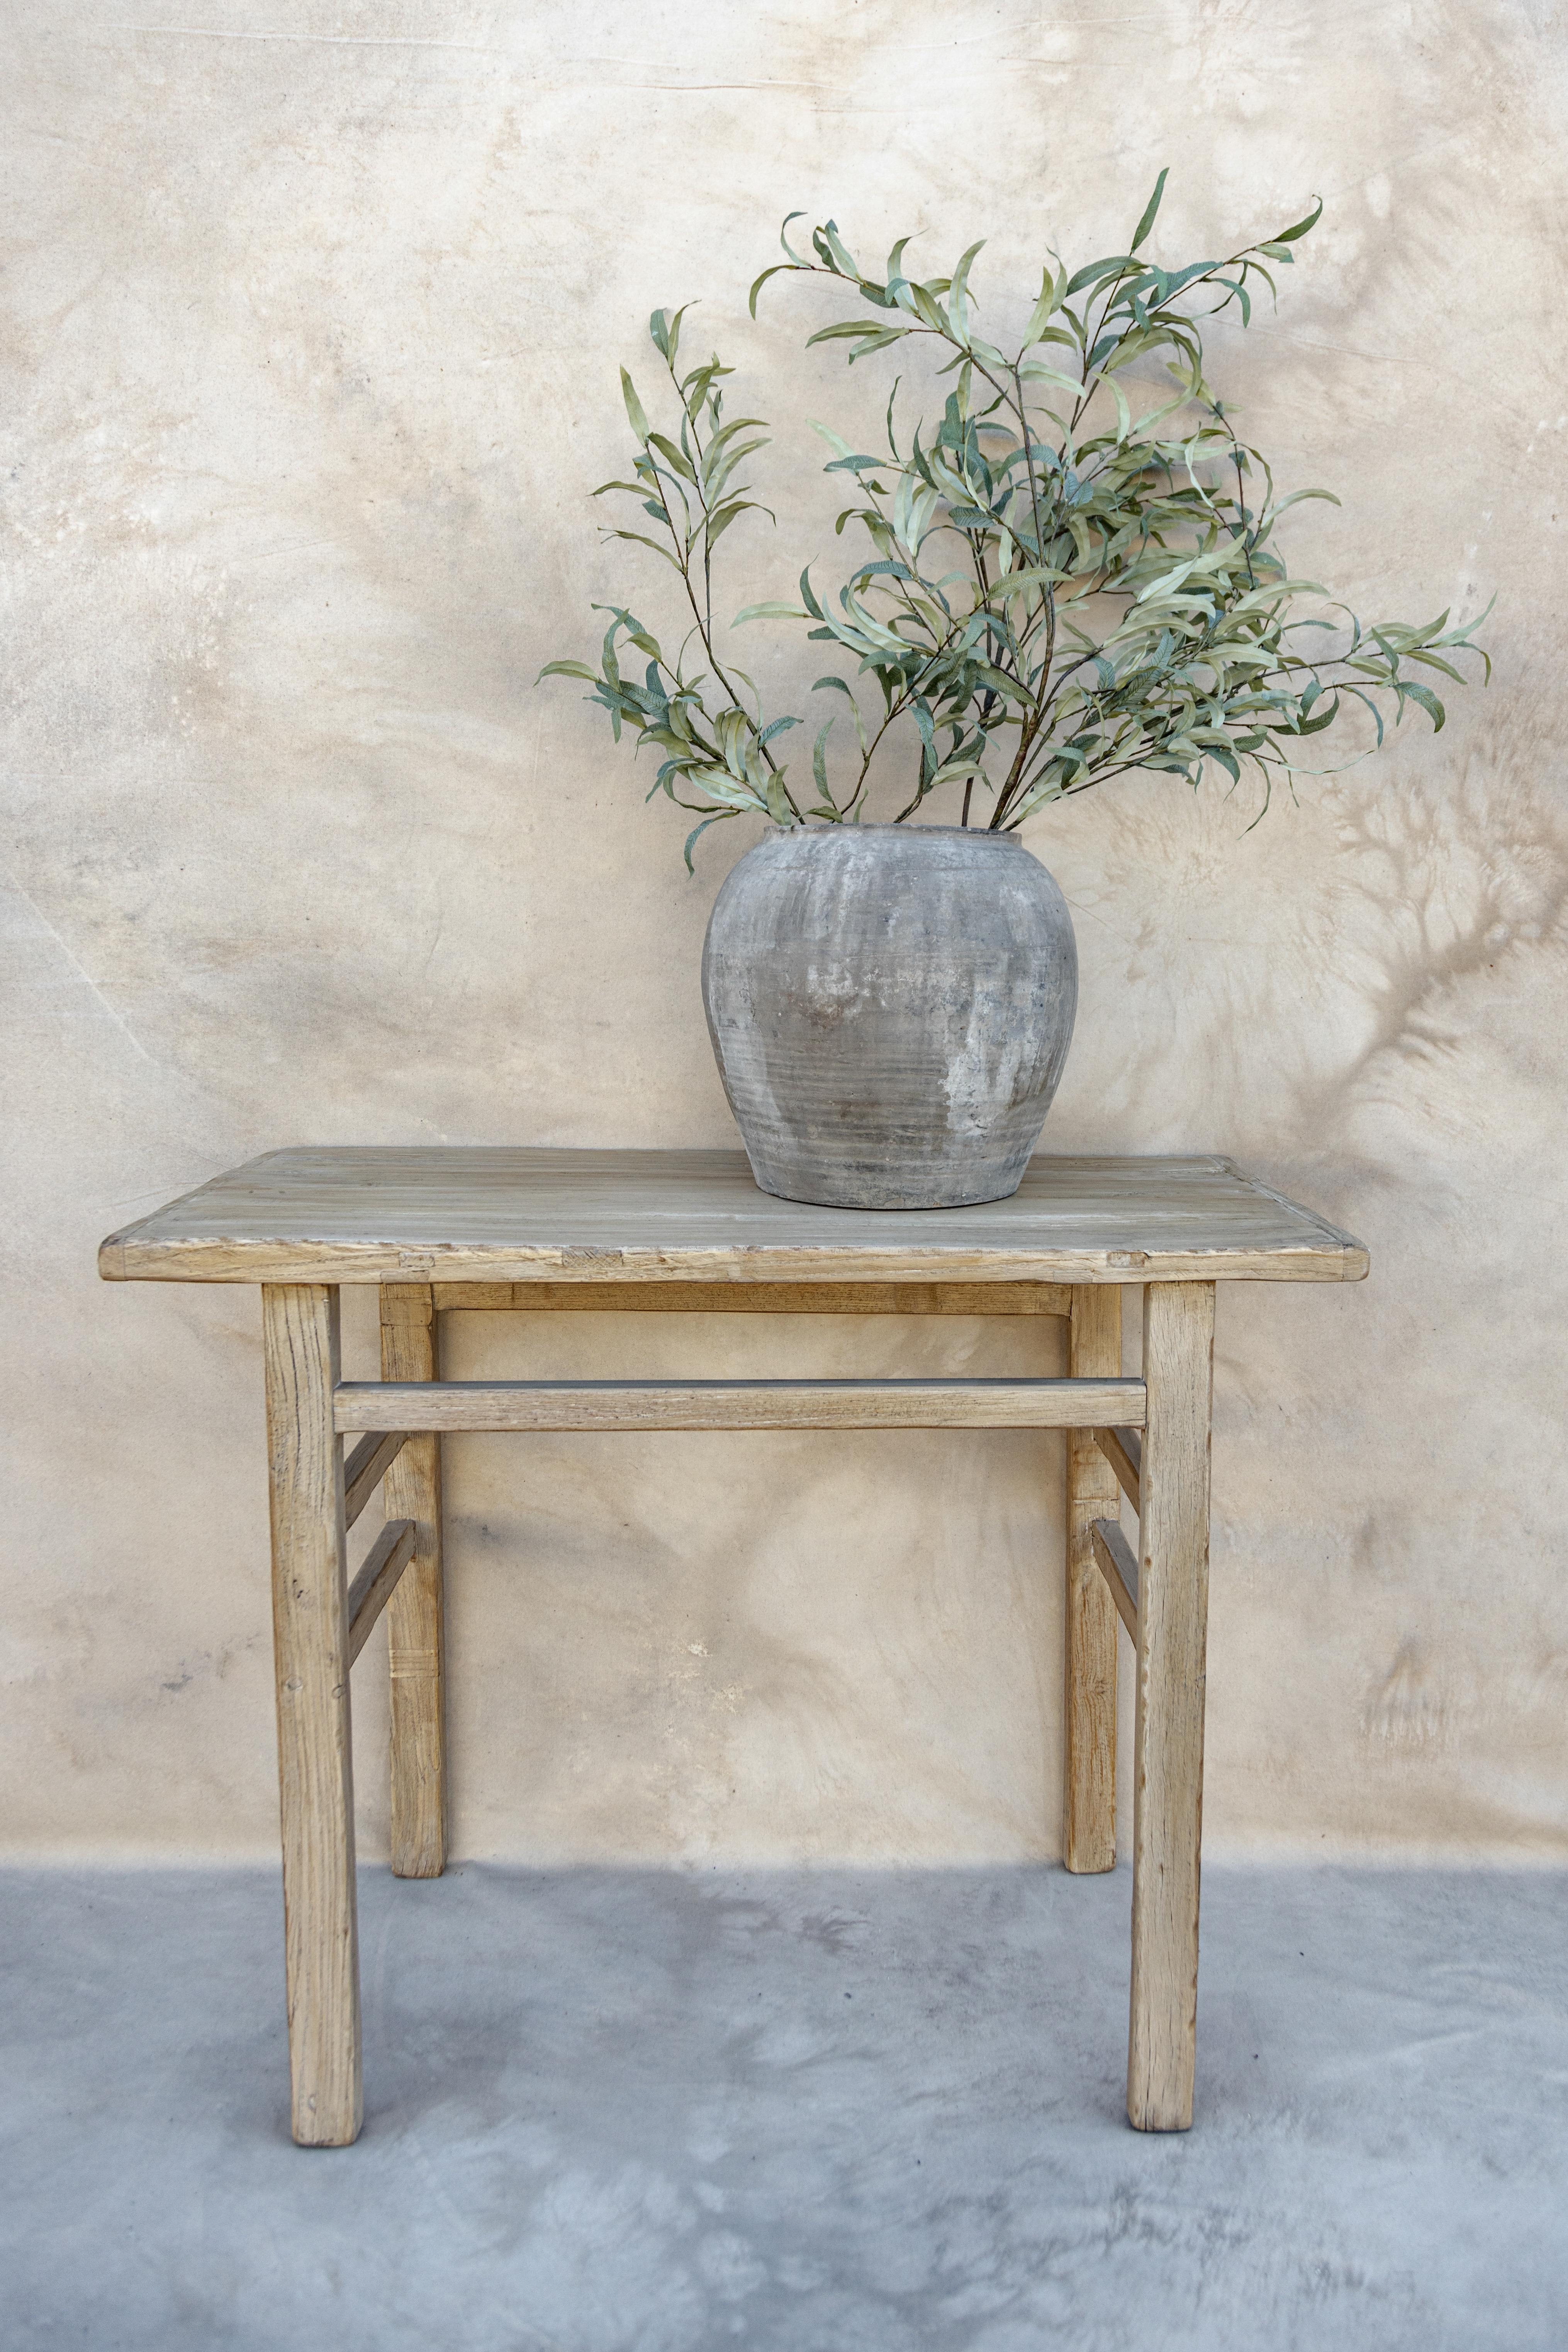 Introducing our Atlas console table. Crafted from vintage elm wood sourced throughout Europe and Asia. We love the minimalist, rustic design, and more narrow profile, perfect for the end of a hallway or smaller entryway. This piece is perfectly